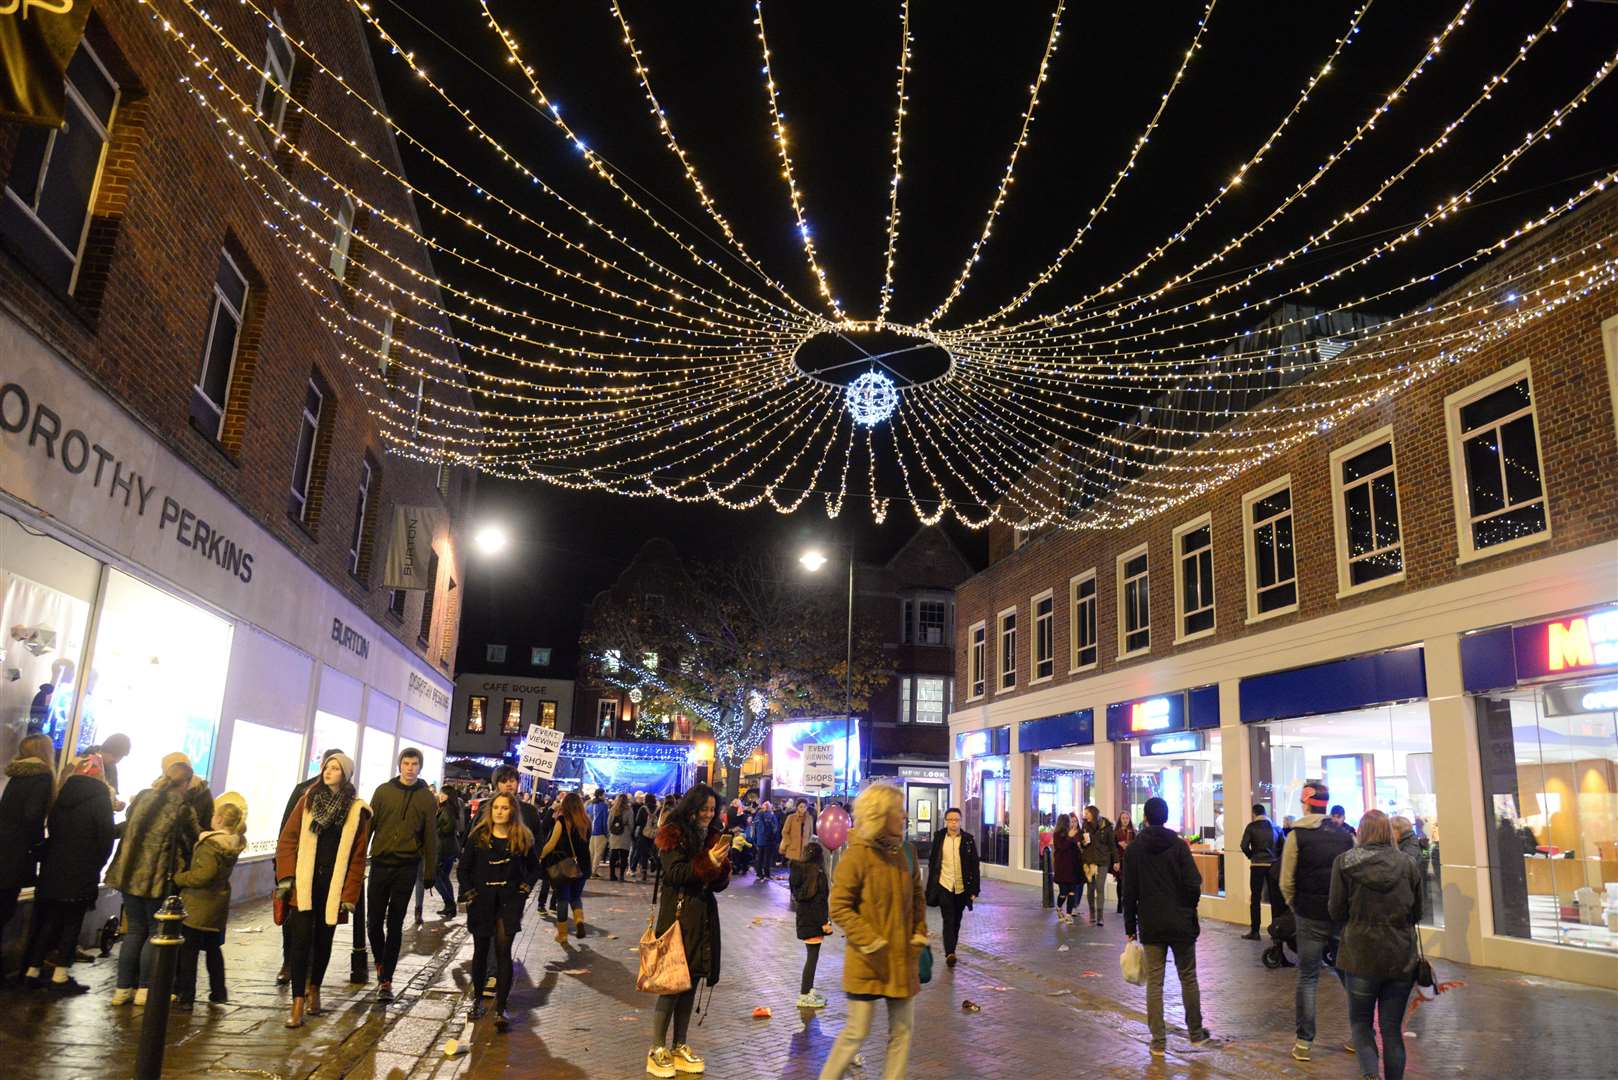 Spotlight will be on small businesses this weekend as countdown to Christmas begins